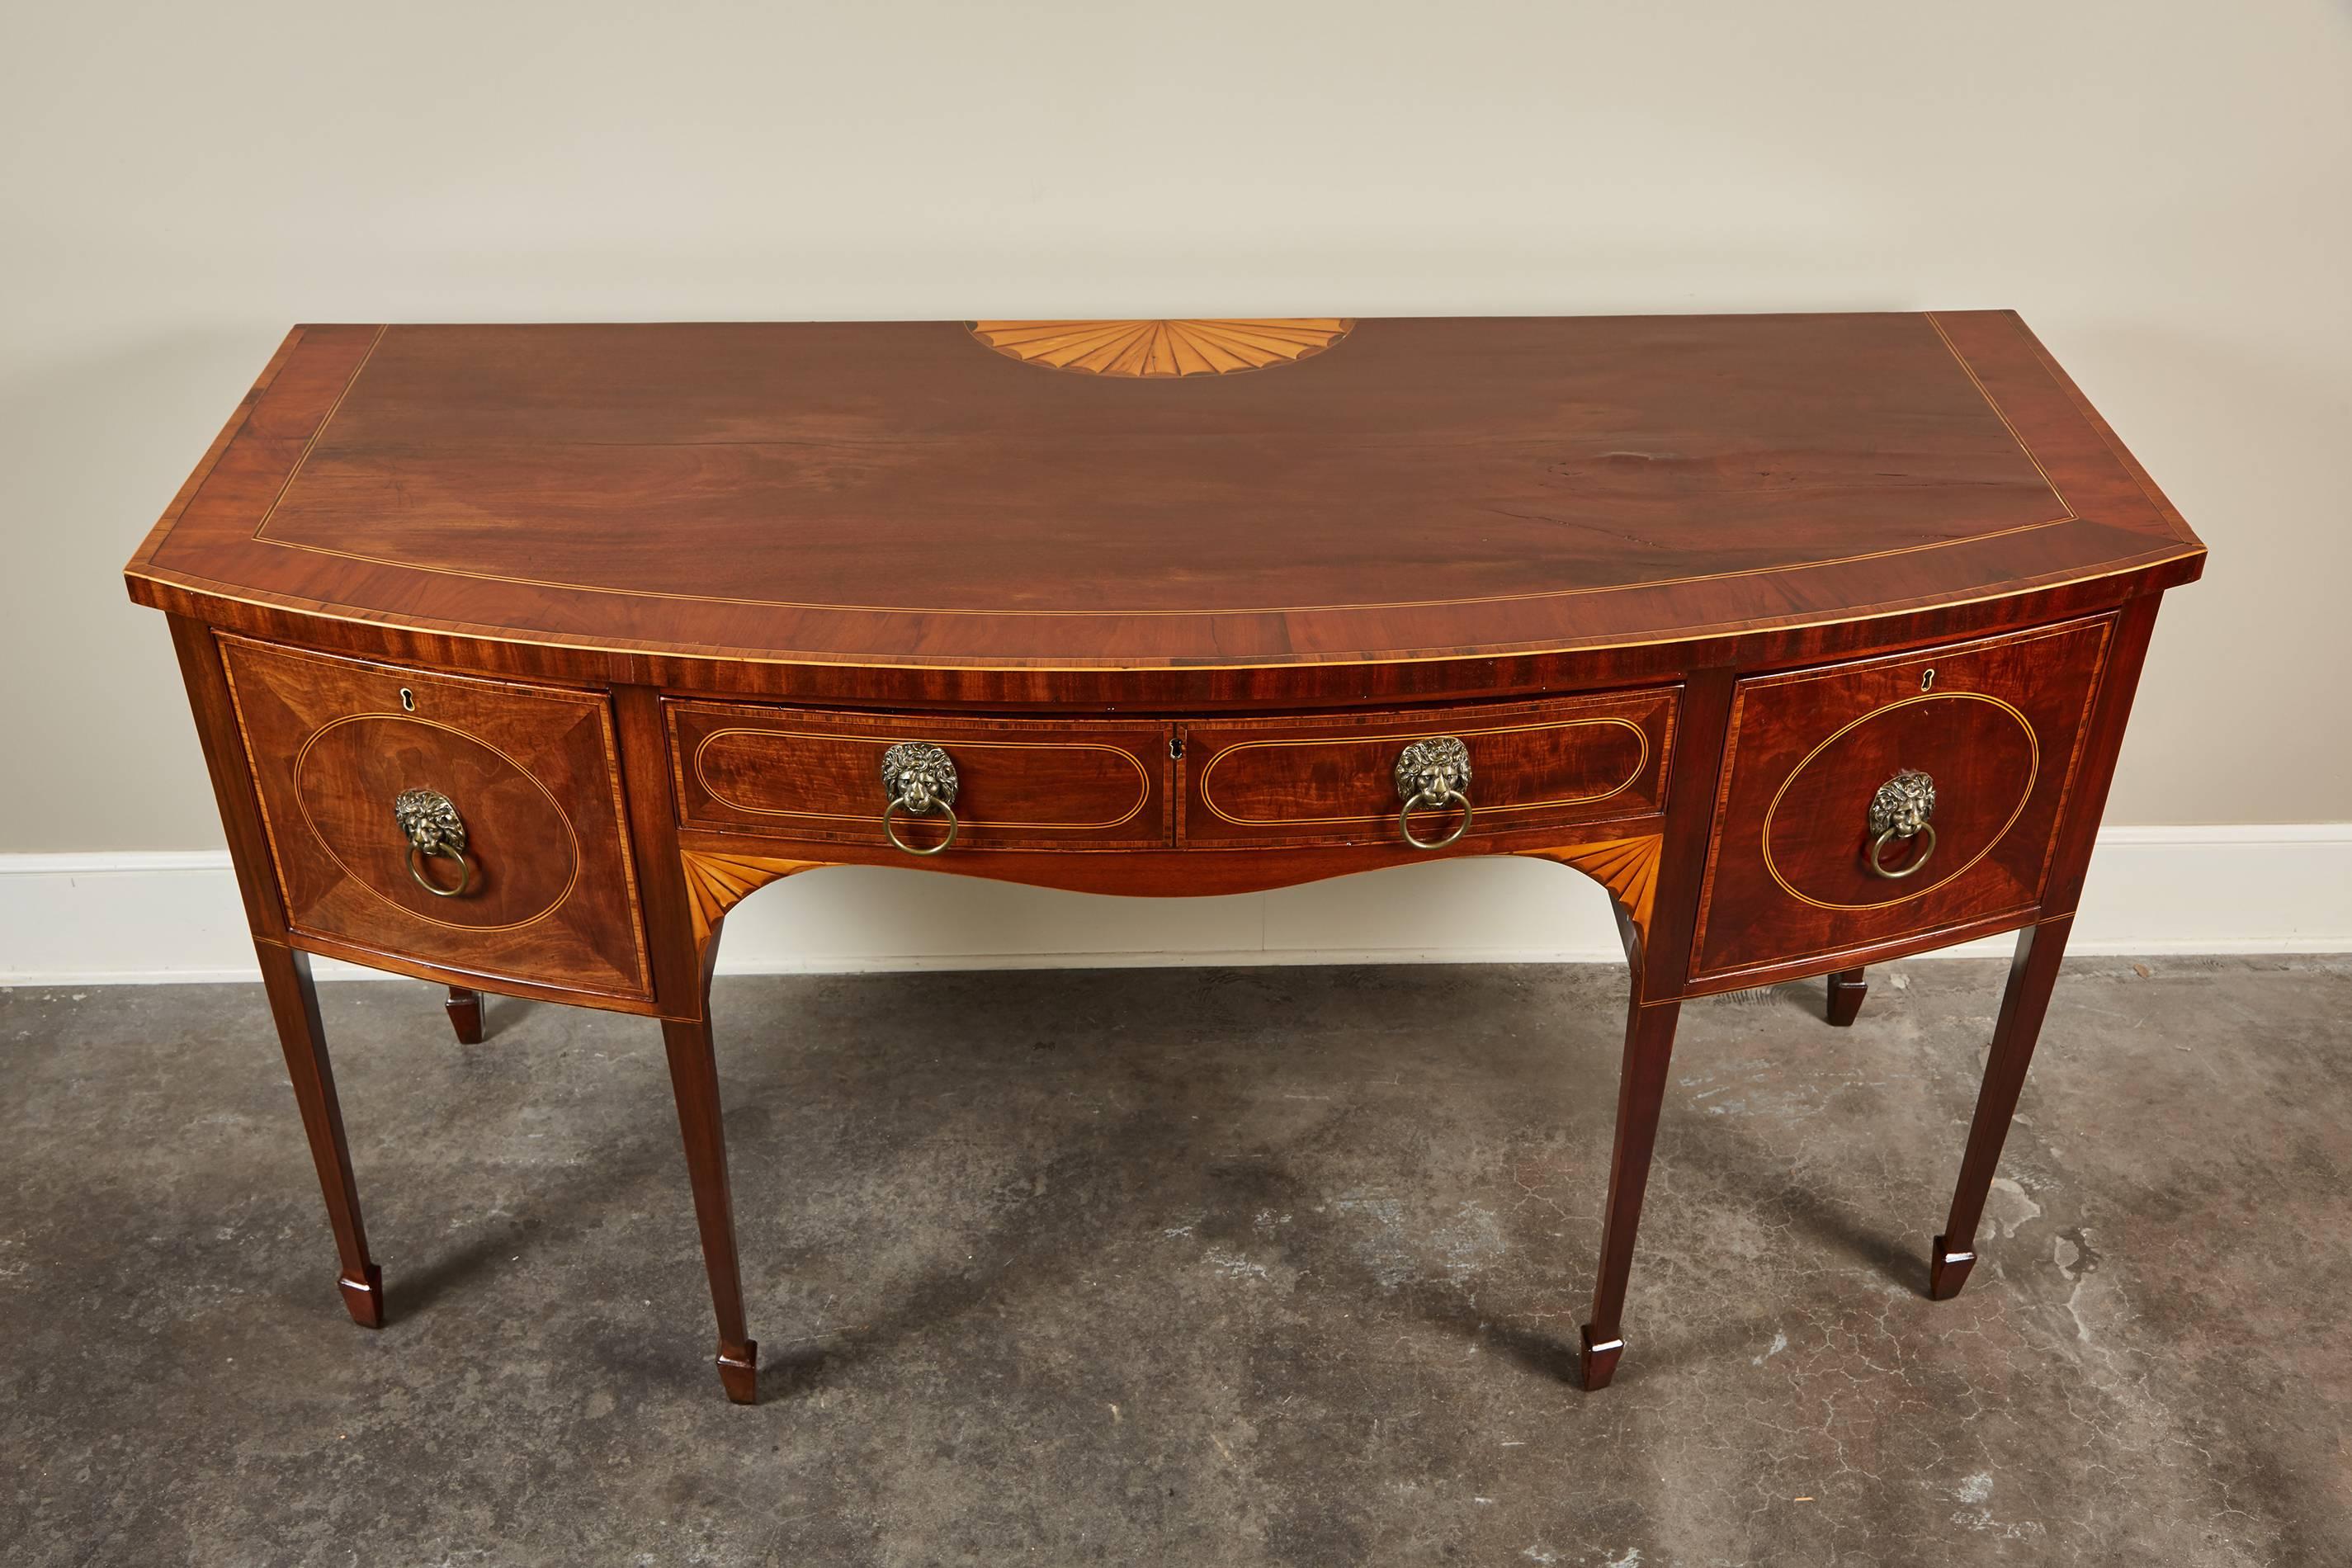 An early 19th century Georgian bow front sideboard in mahogany featuring inlaid fan detailing on the top and edge banding, sitting on spade feet. The sideboard also consists of two drawers and two doors with lion head hardware and oakwood interiors.